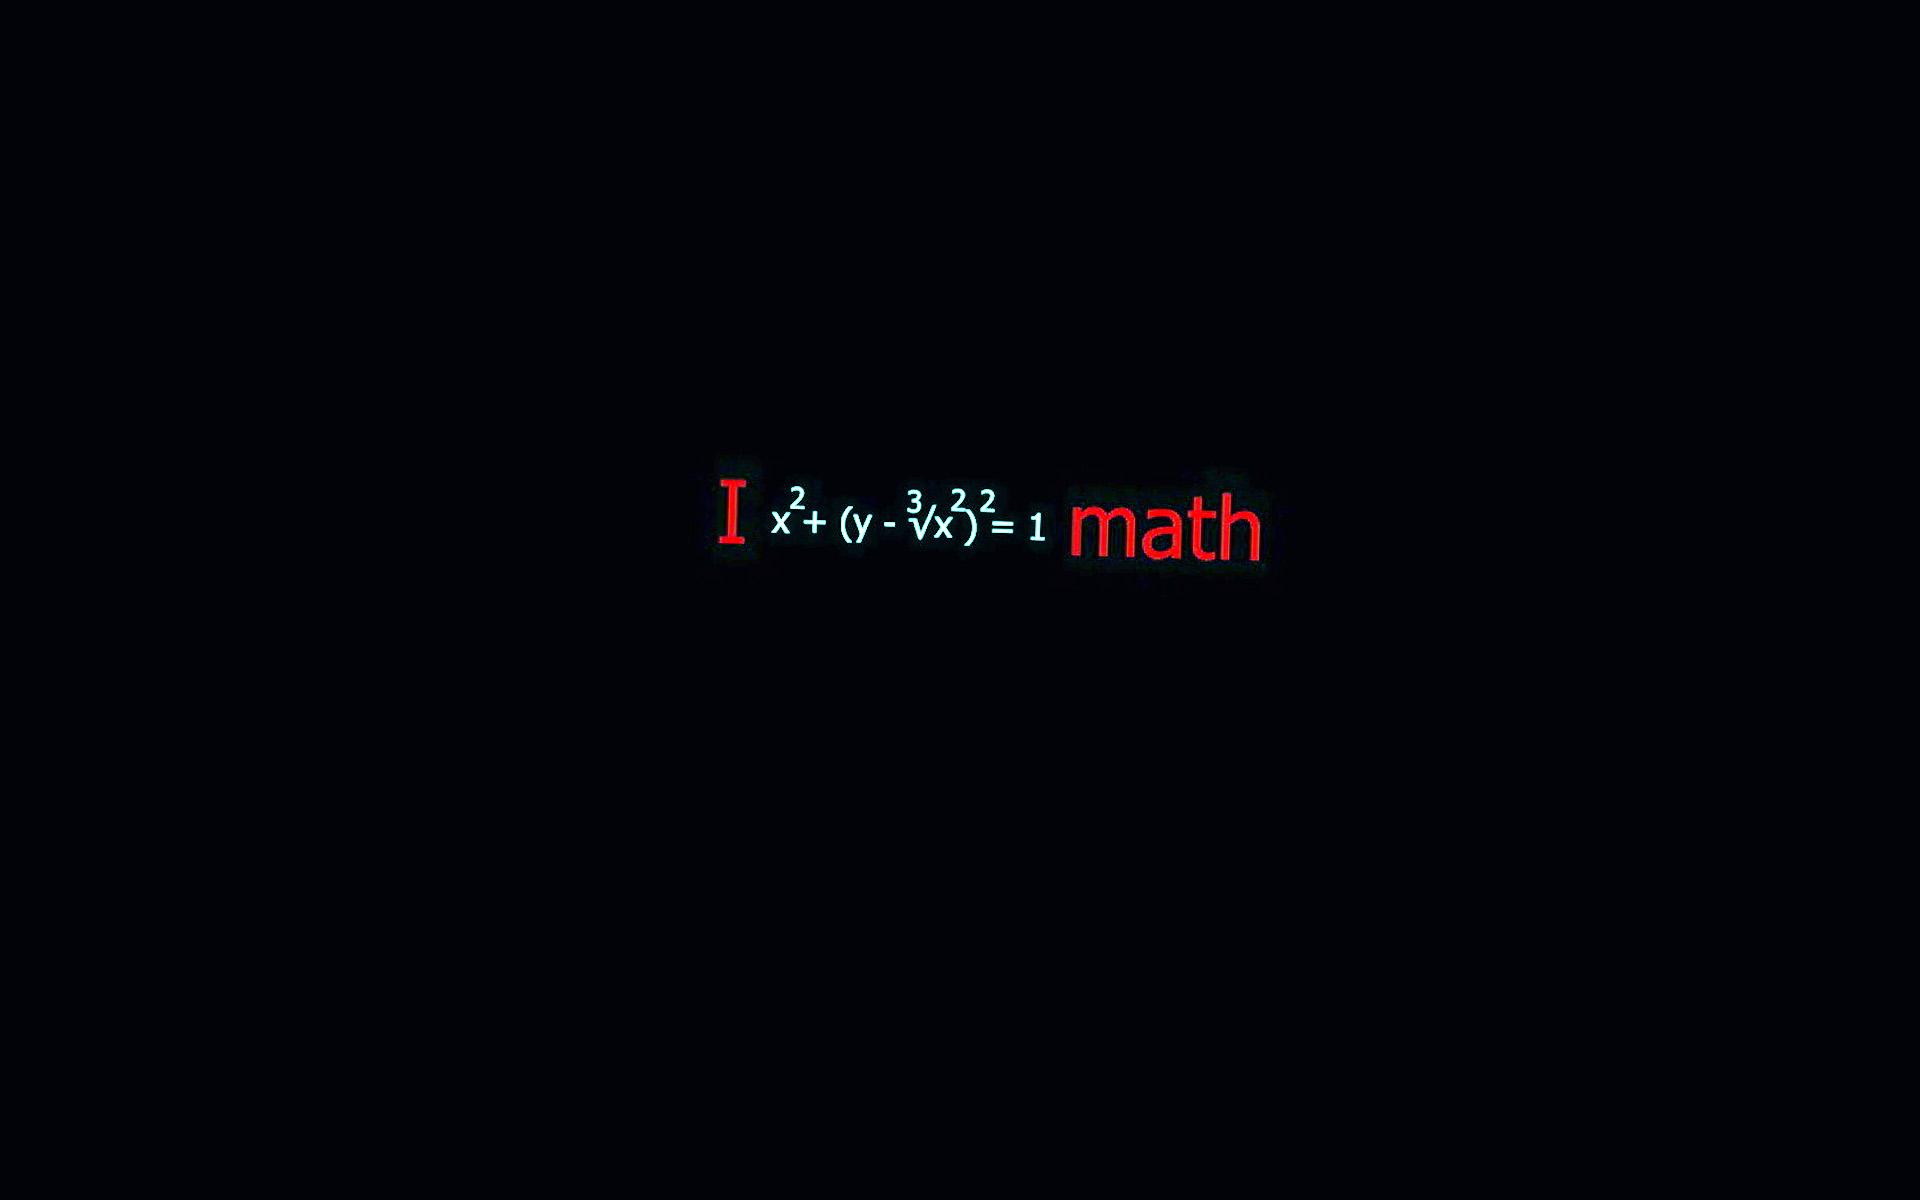 Funny Wallpaper Related To Maths